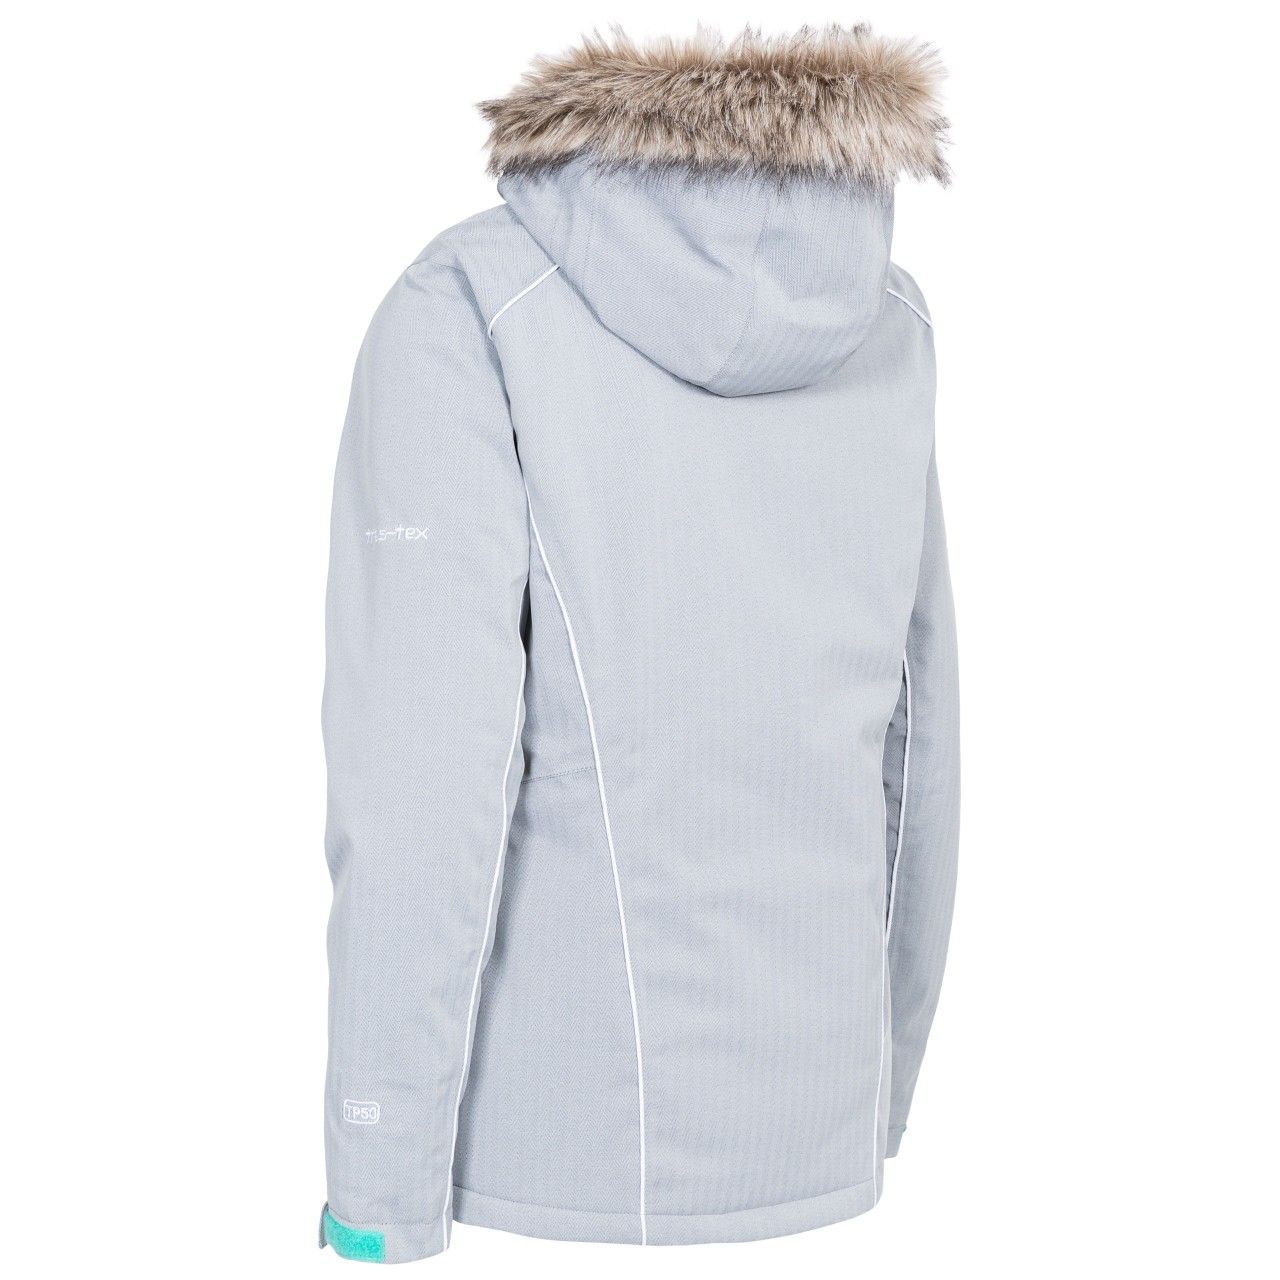 100% polyester. Womens ski jacket with faux fur lined hood. Touch fastening sleeves. 2 x front pockets. Full zip. Ideal for skiing.